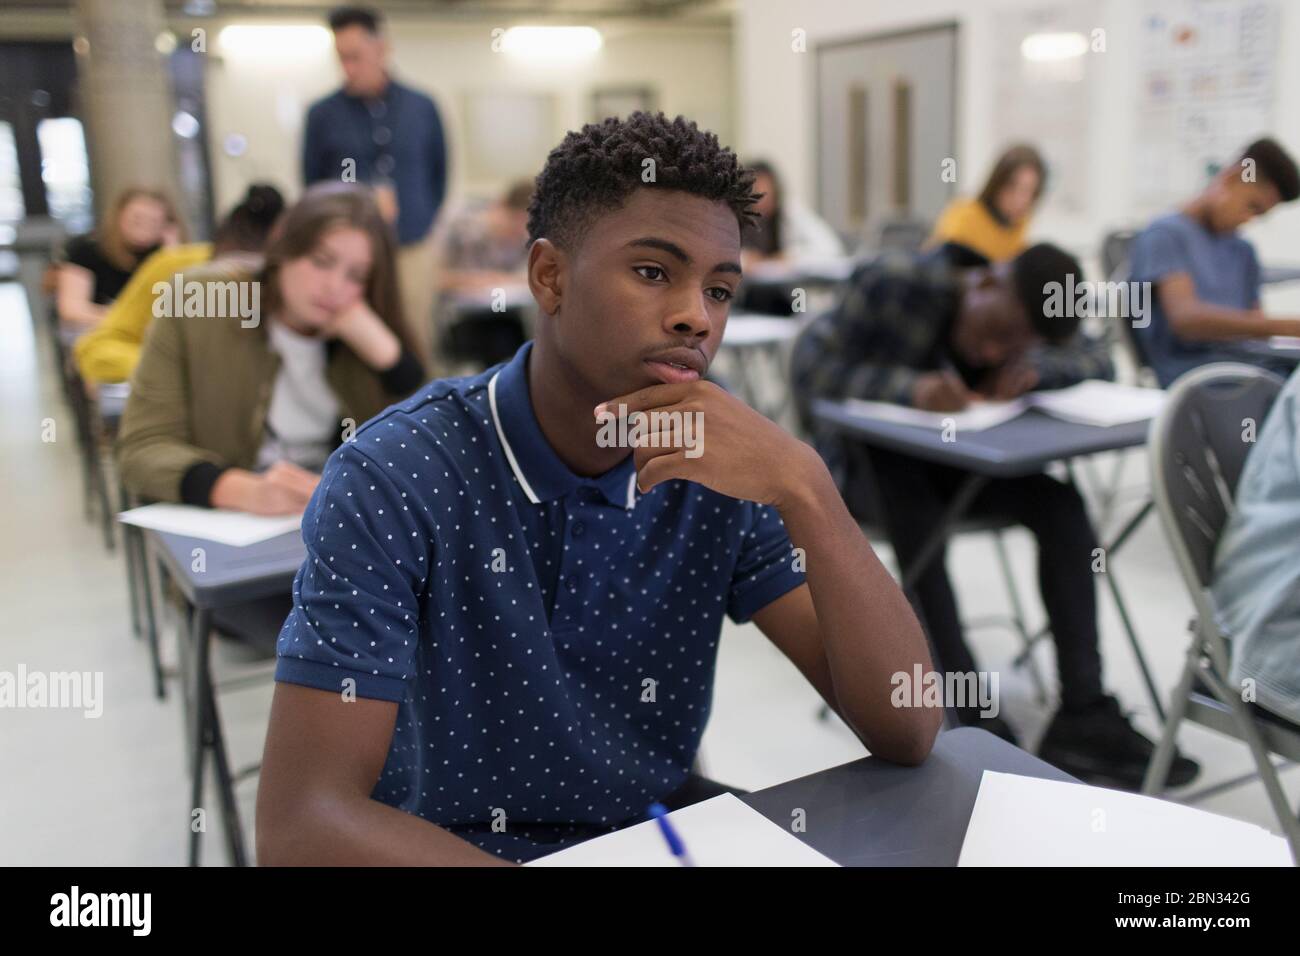 Thoughtful high school boy taking exam at desk in classroom Stock Photo